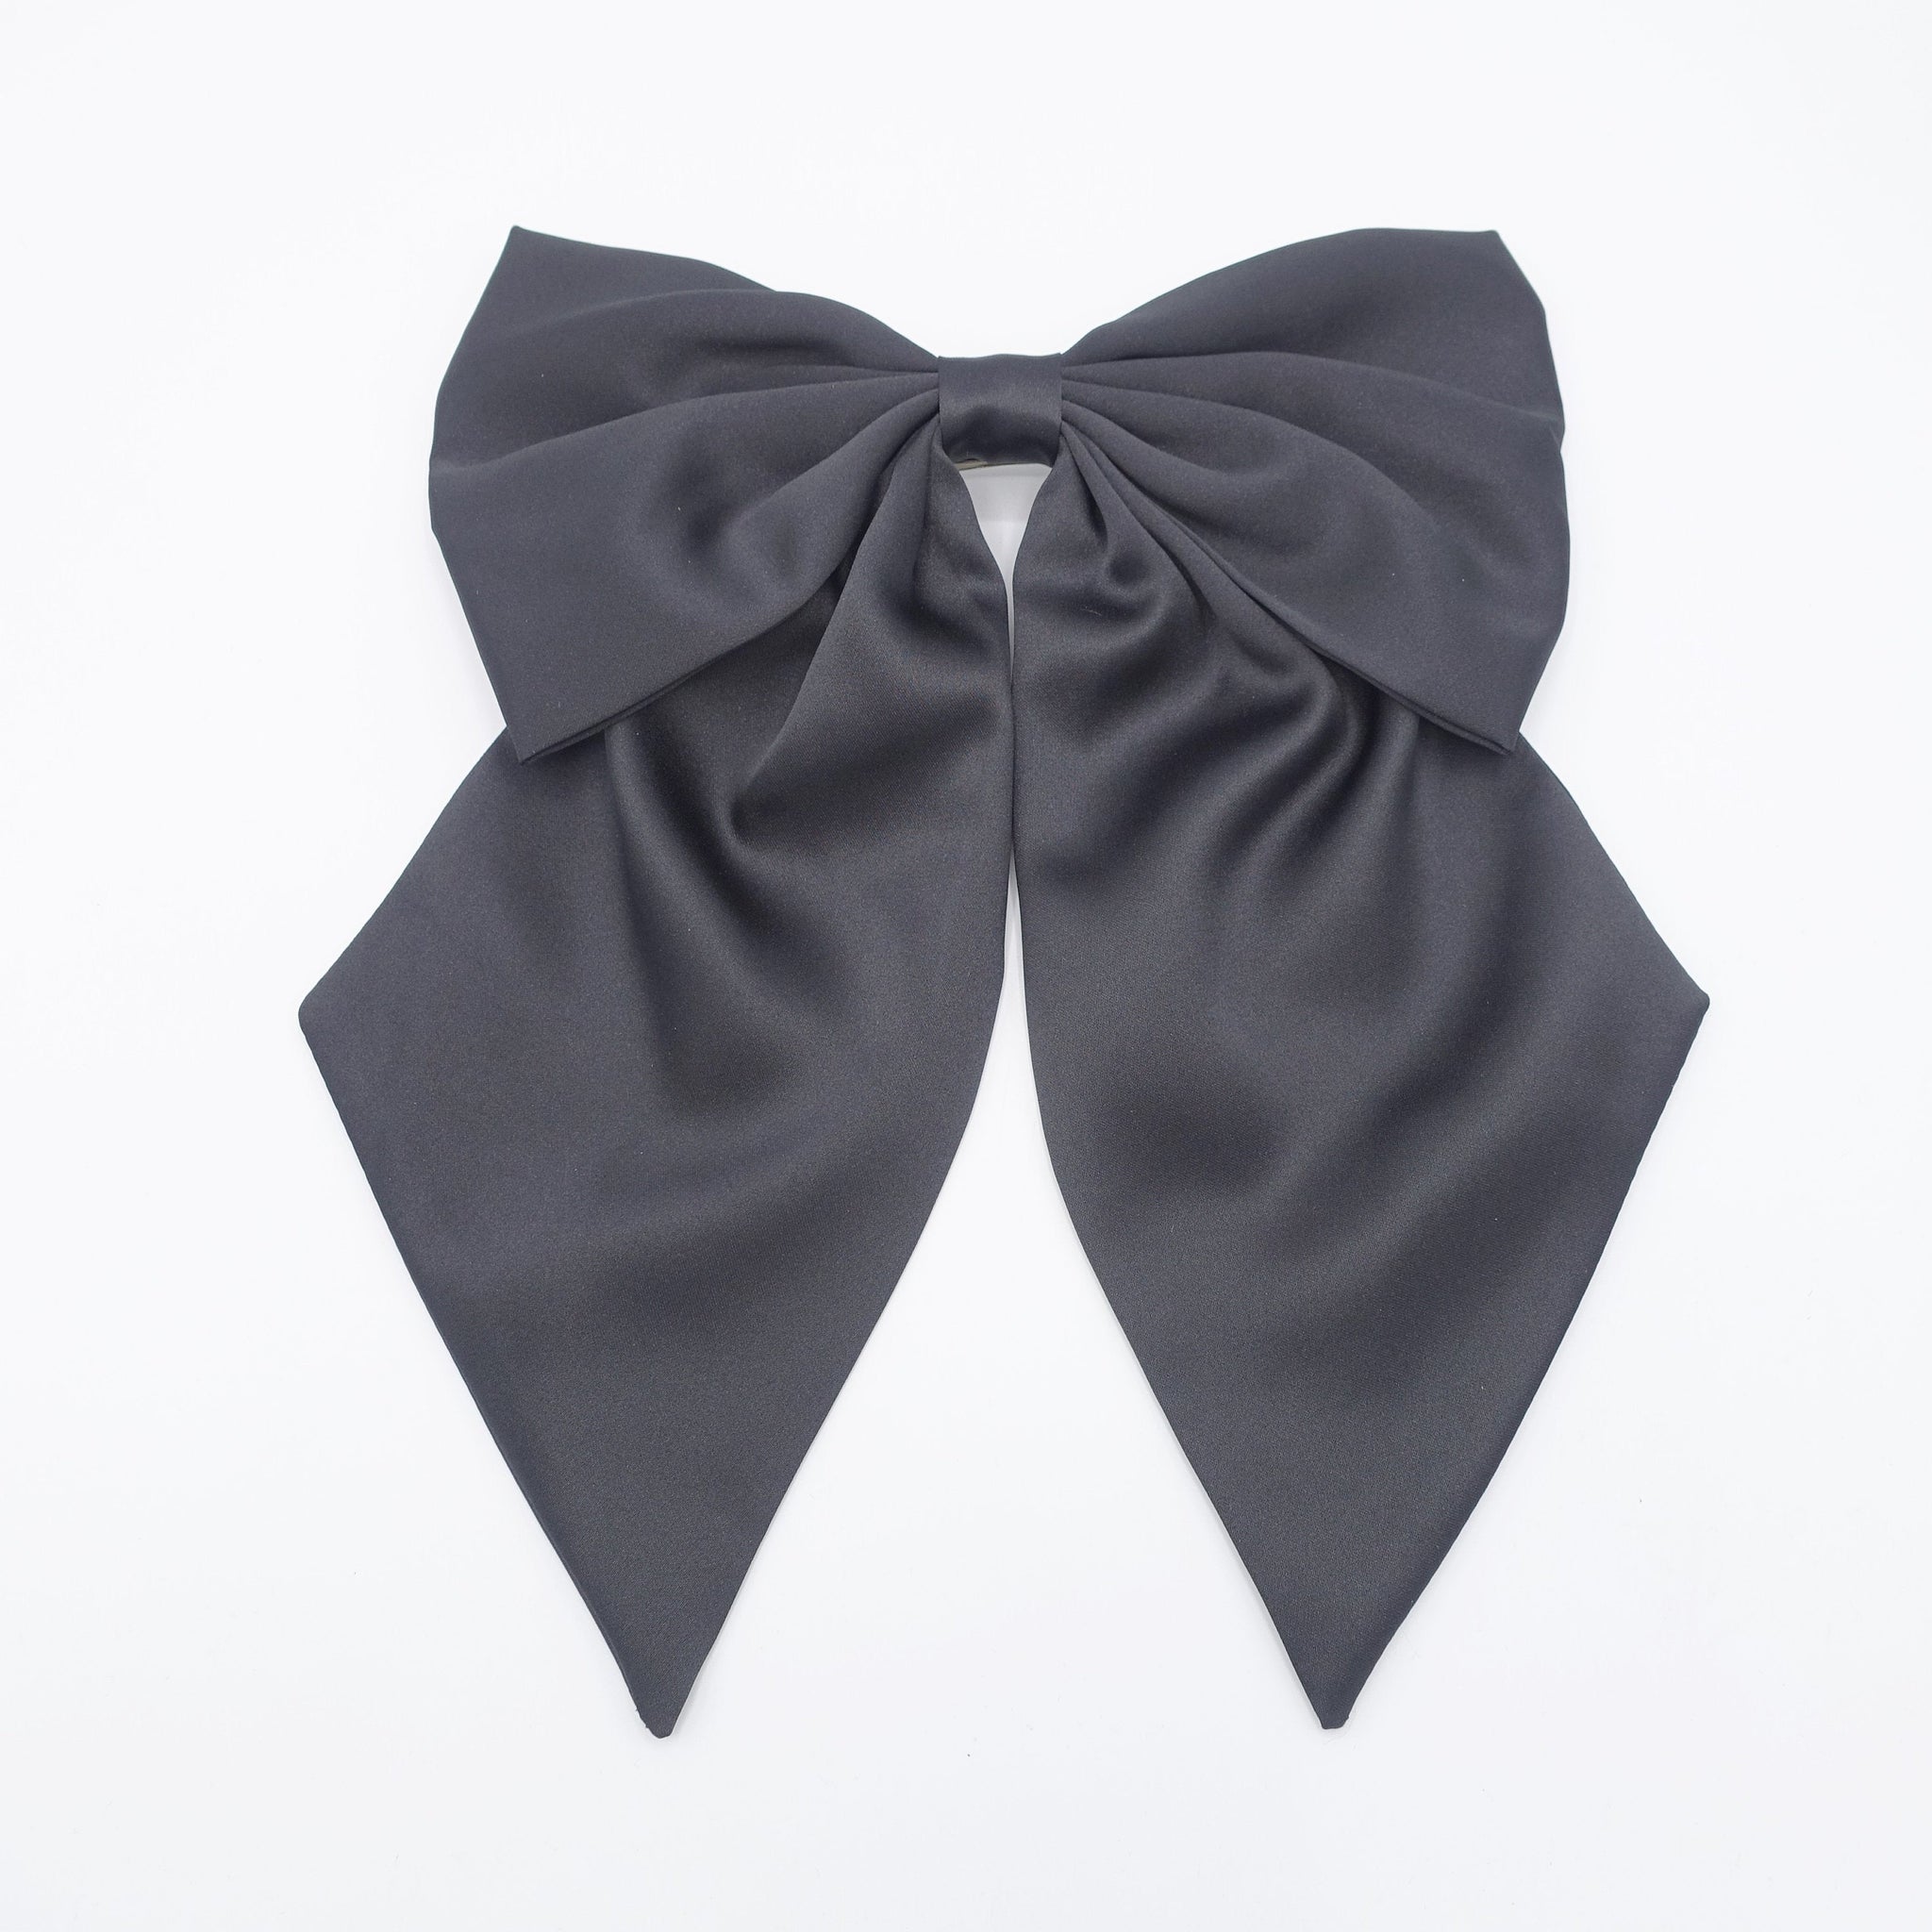 Elegant black satin hair bow with French barrette clip